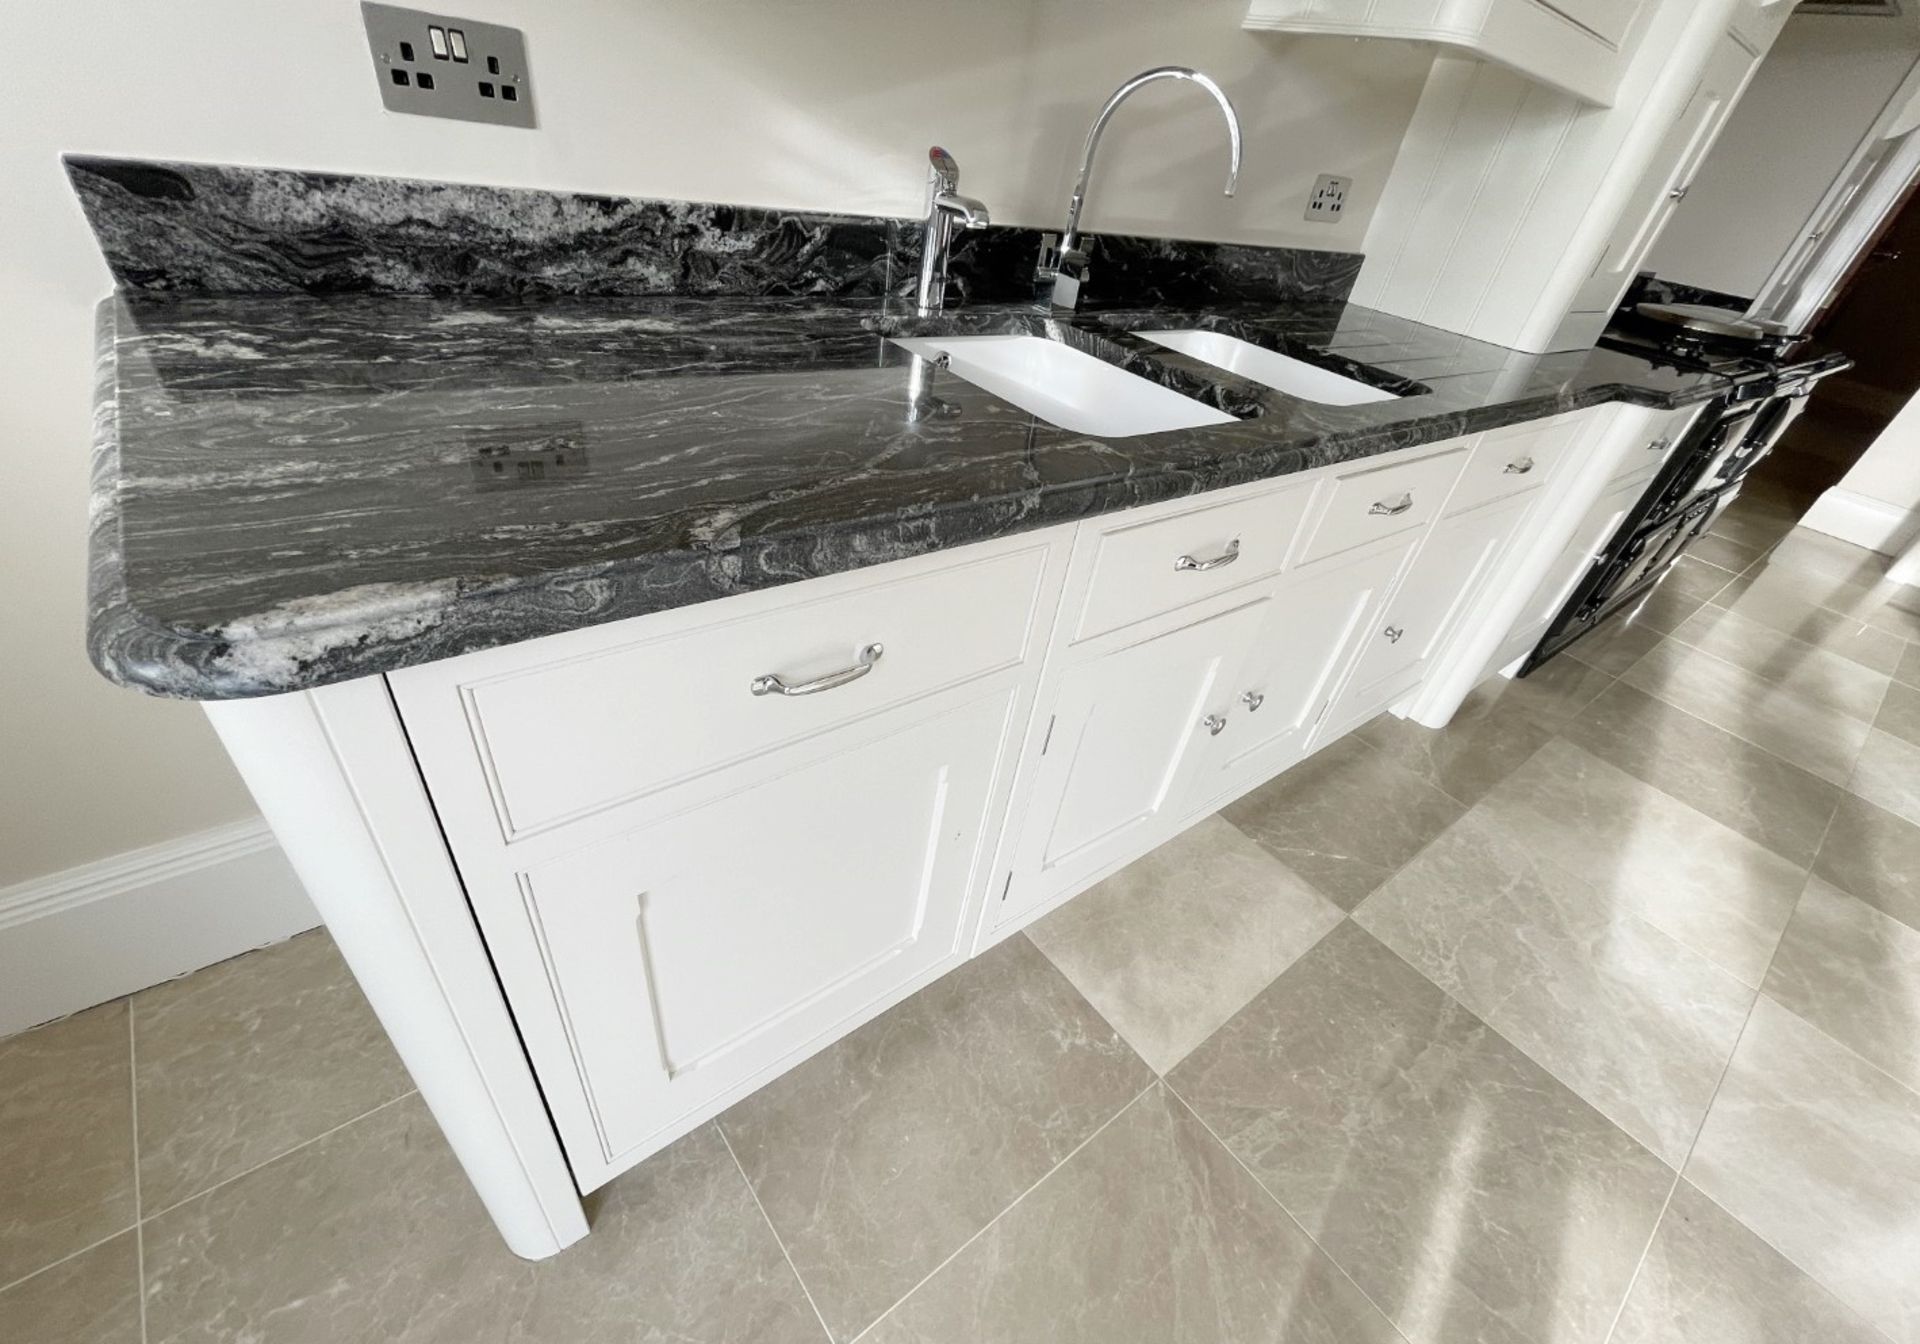 1 x Bespoke Handcrafted Shaker-style Fitted Kitchen Marble Surfaces, Island & Miele Appliances - Image 8 of 221